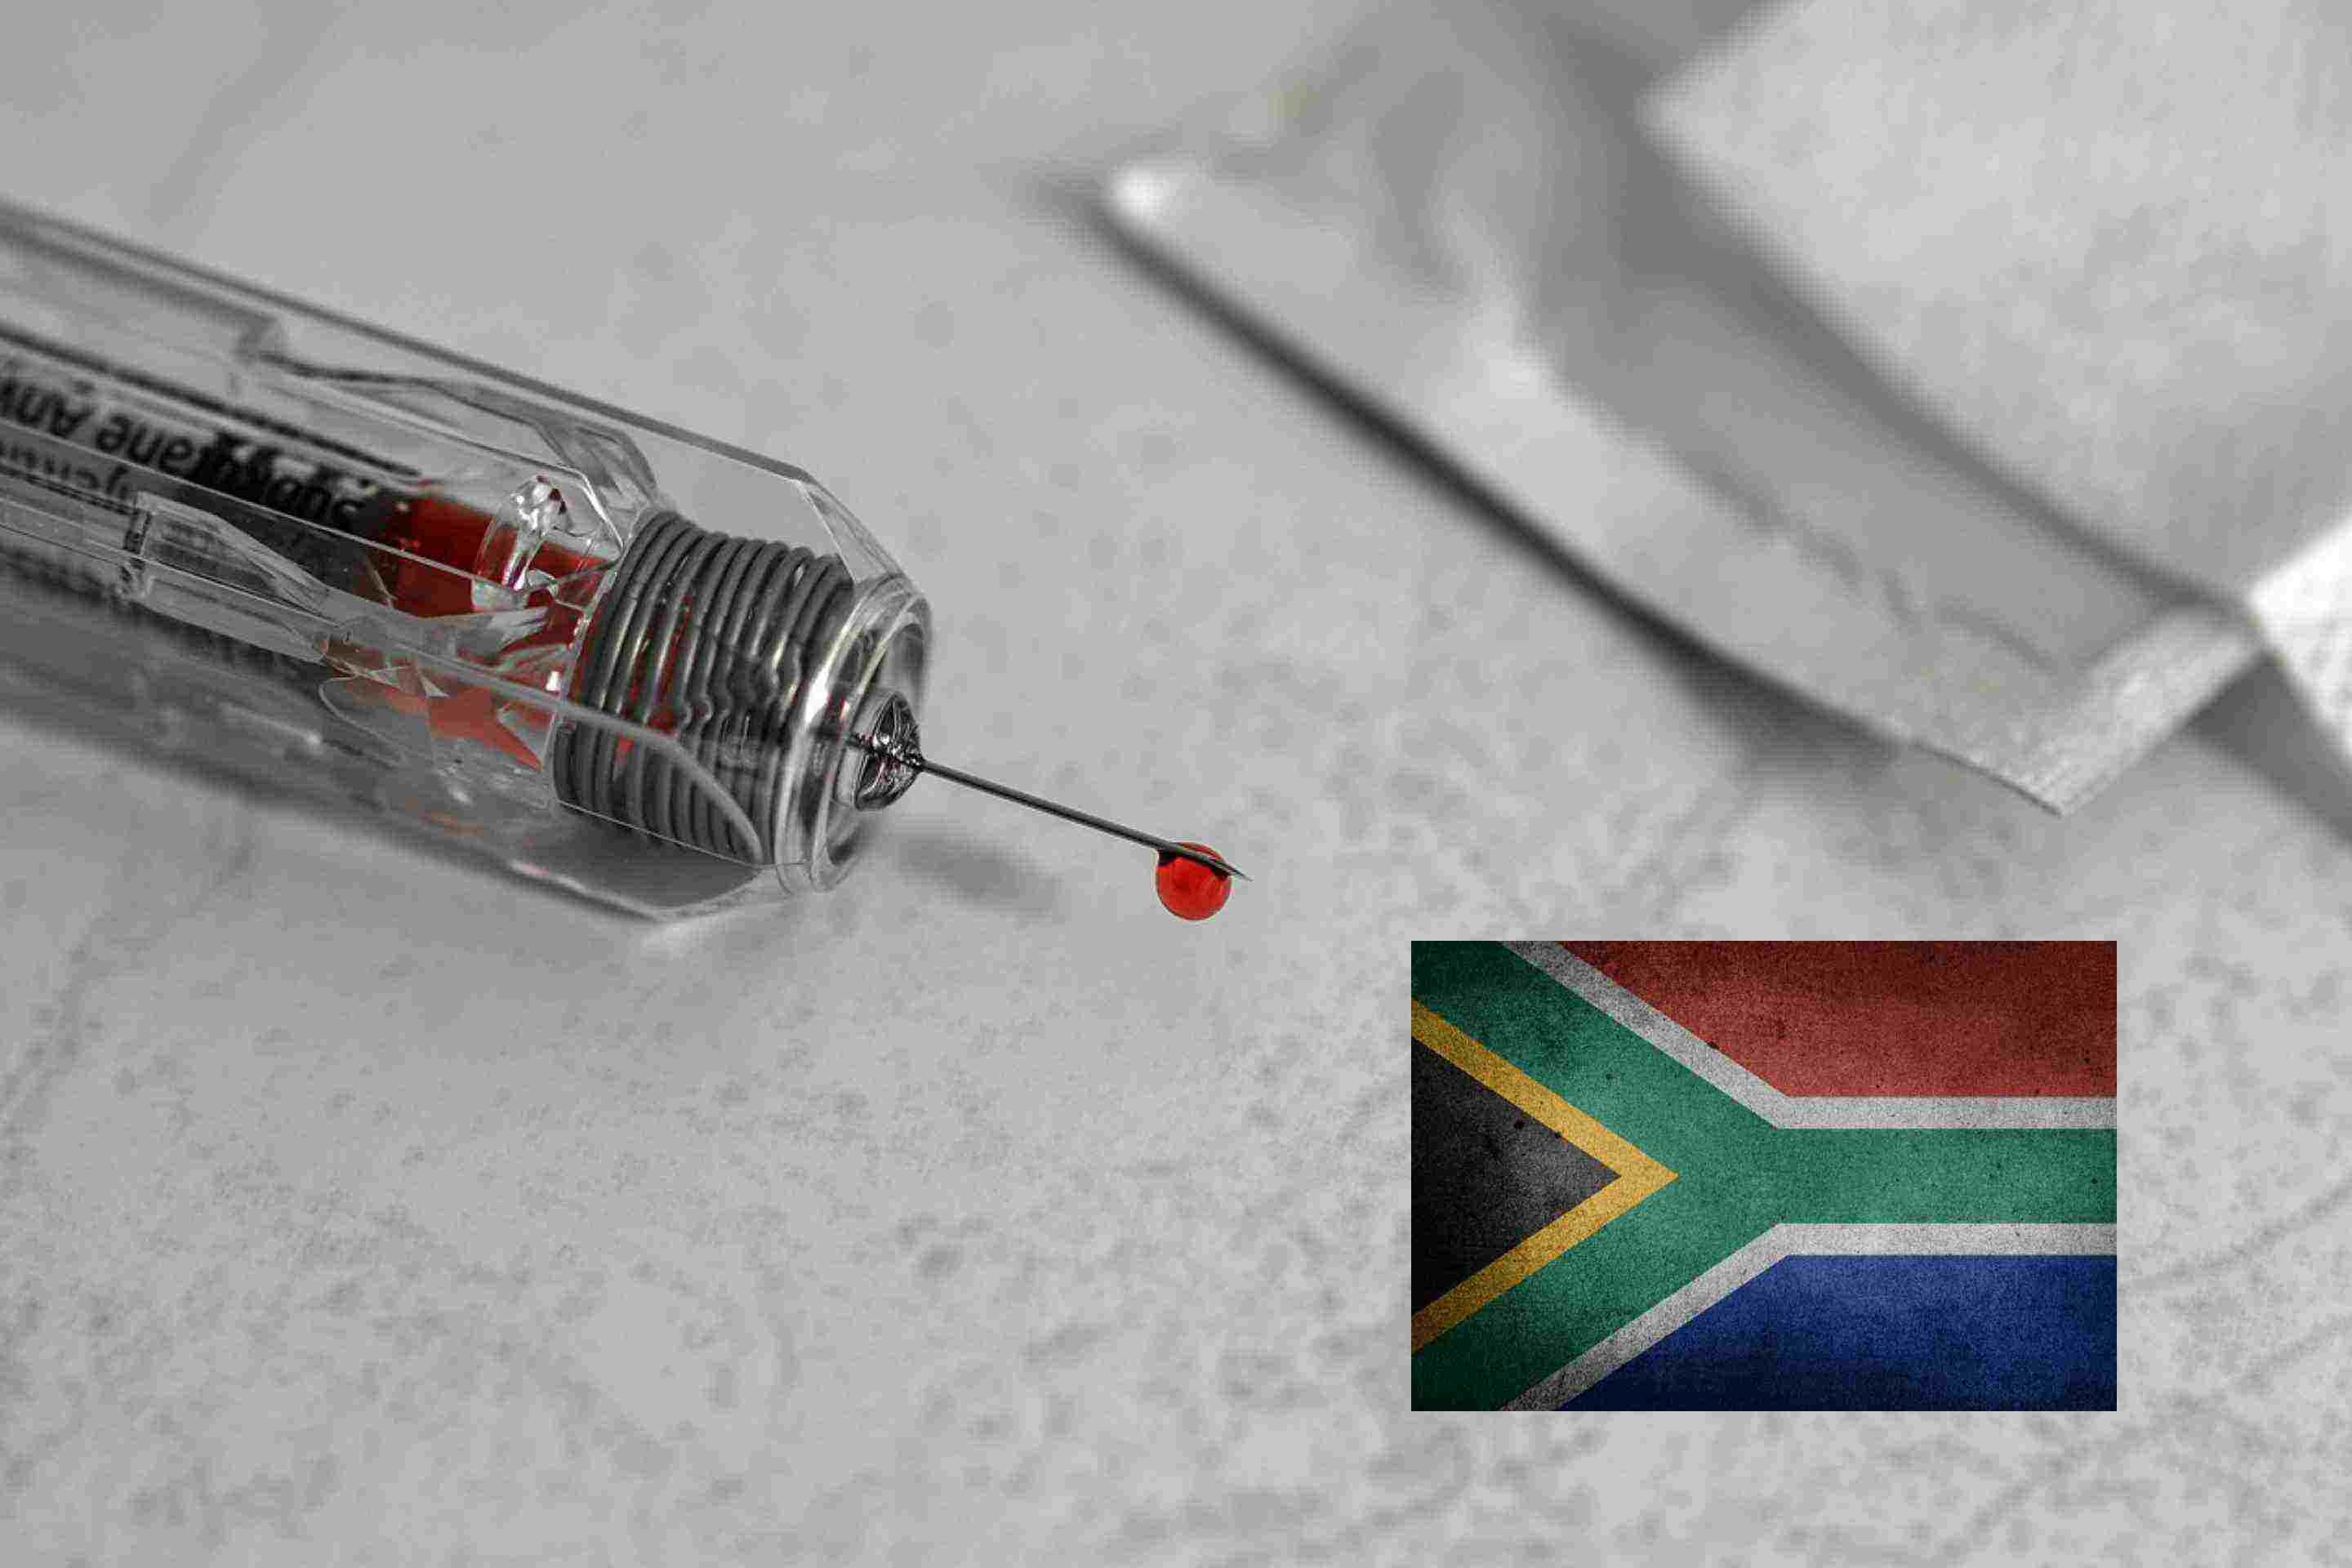 New Documentary Reveals Secret Unit Plotted to Infect South Africa's Black Population With Aids